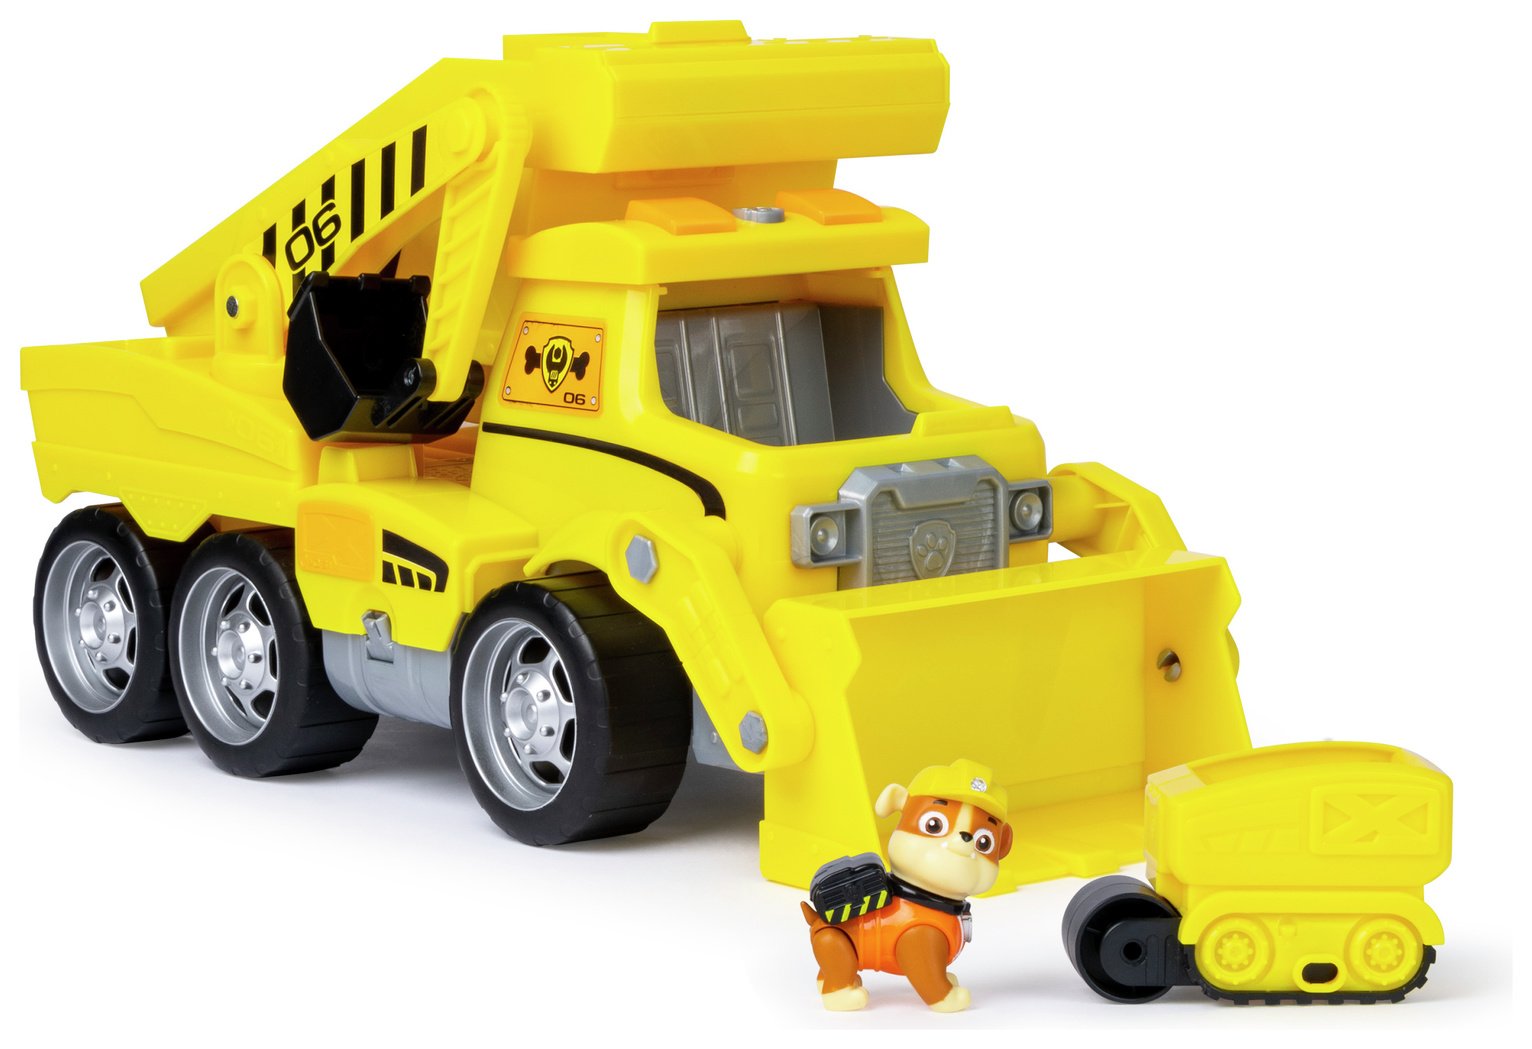 PAW Patrol Ultimate Construction Truck Review